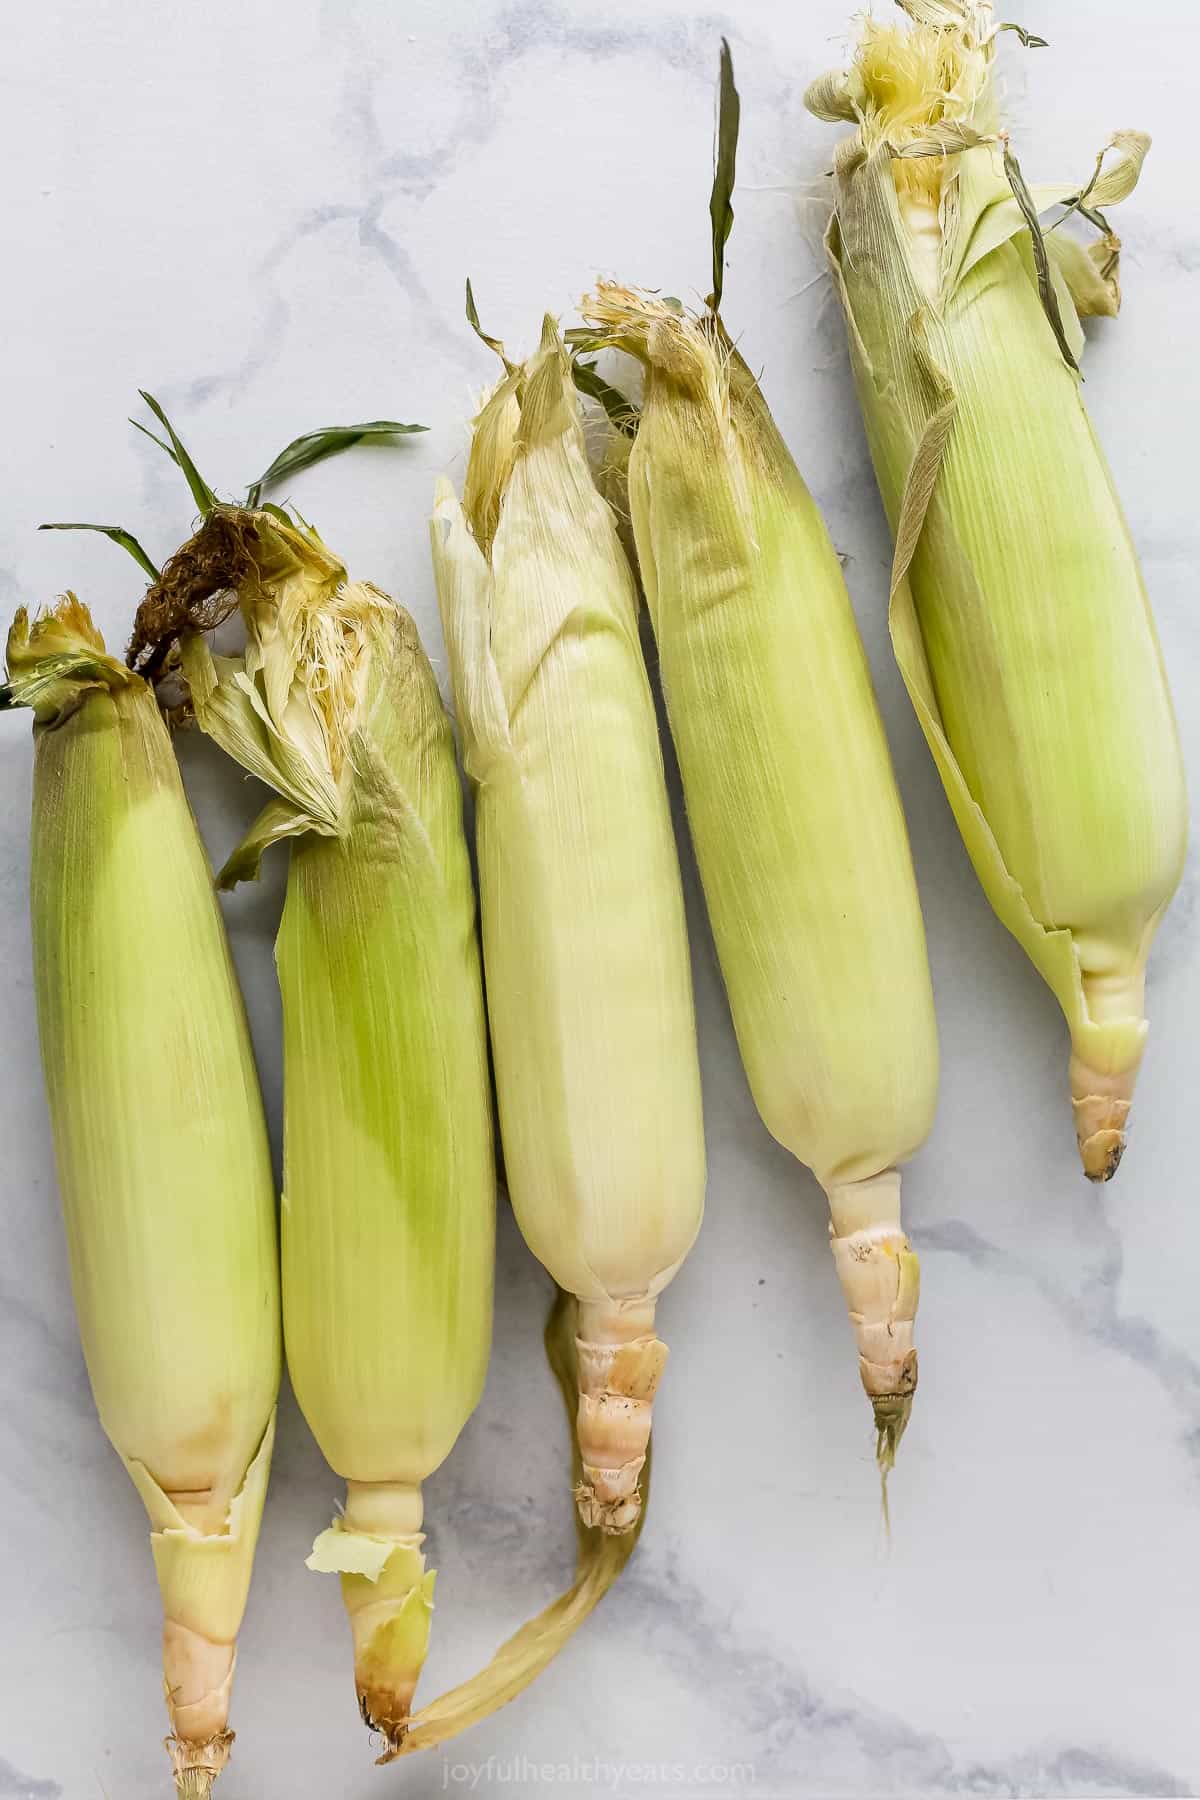 Five fresh ears of corn lined up on a marble kitchen countertop